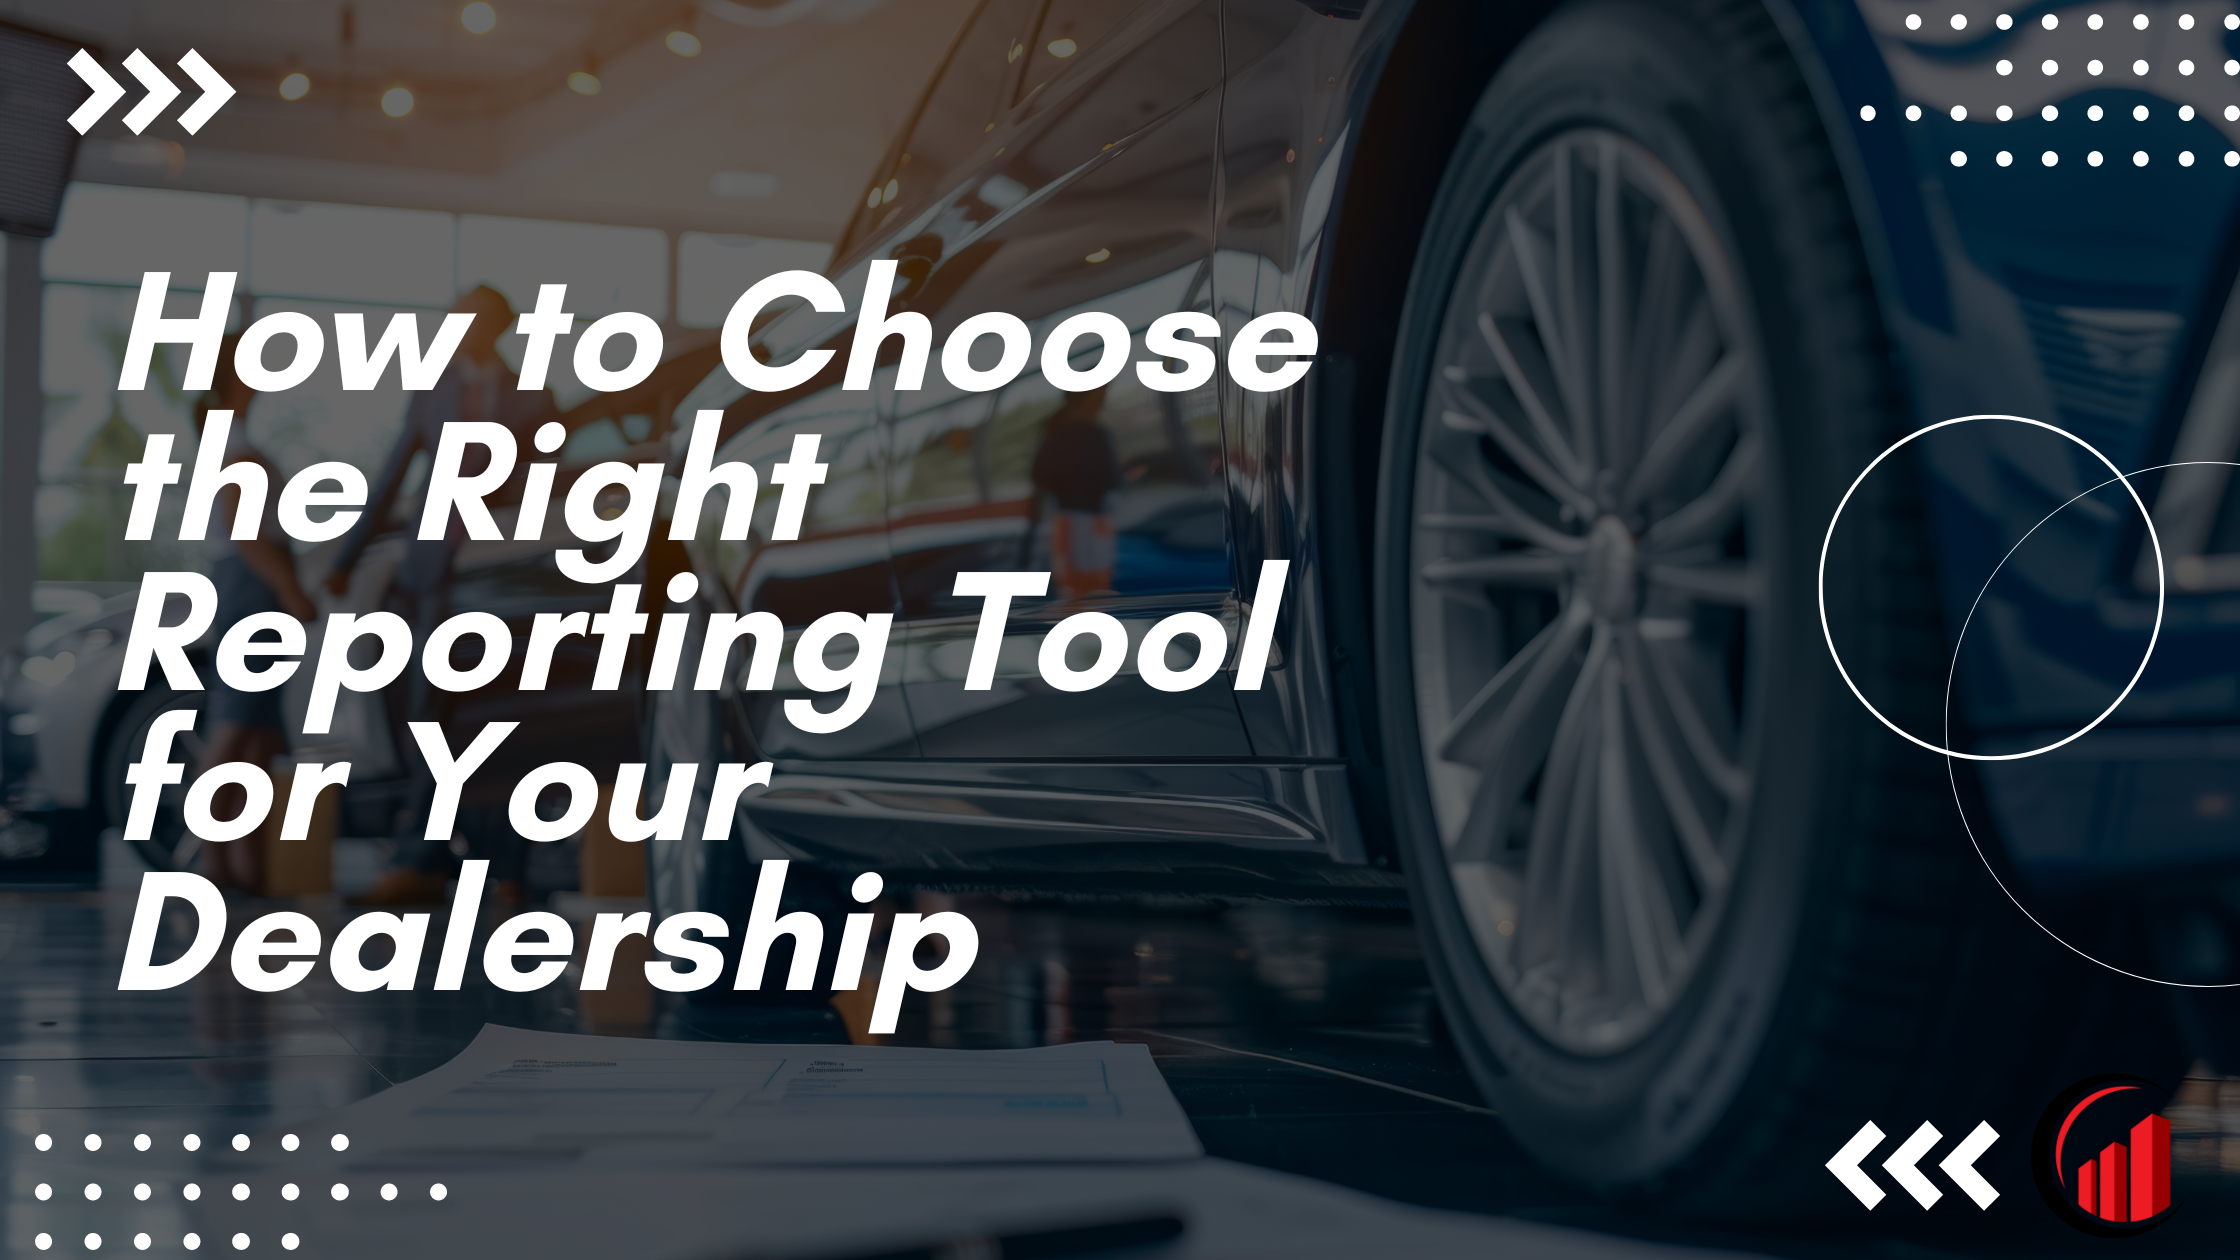 How to Choose the Right Reporting Tool for Your Dealership